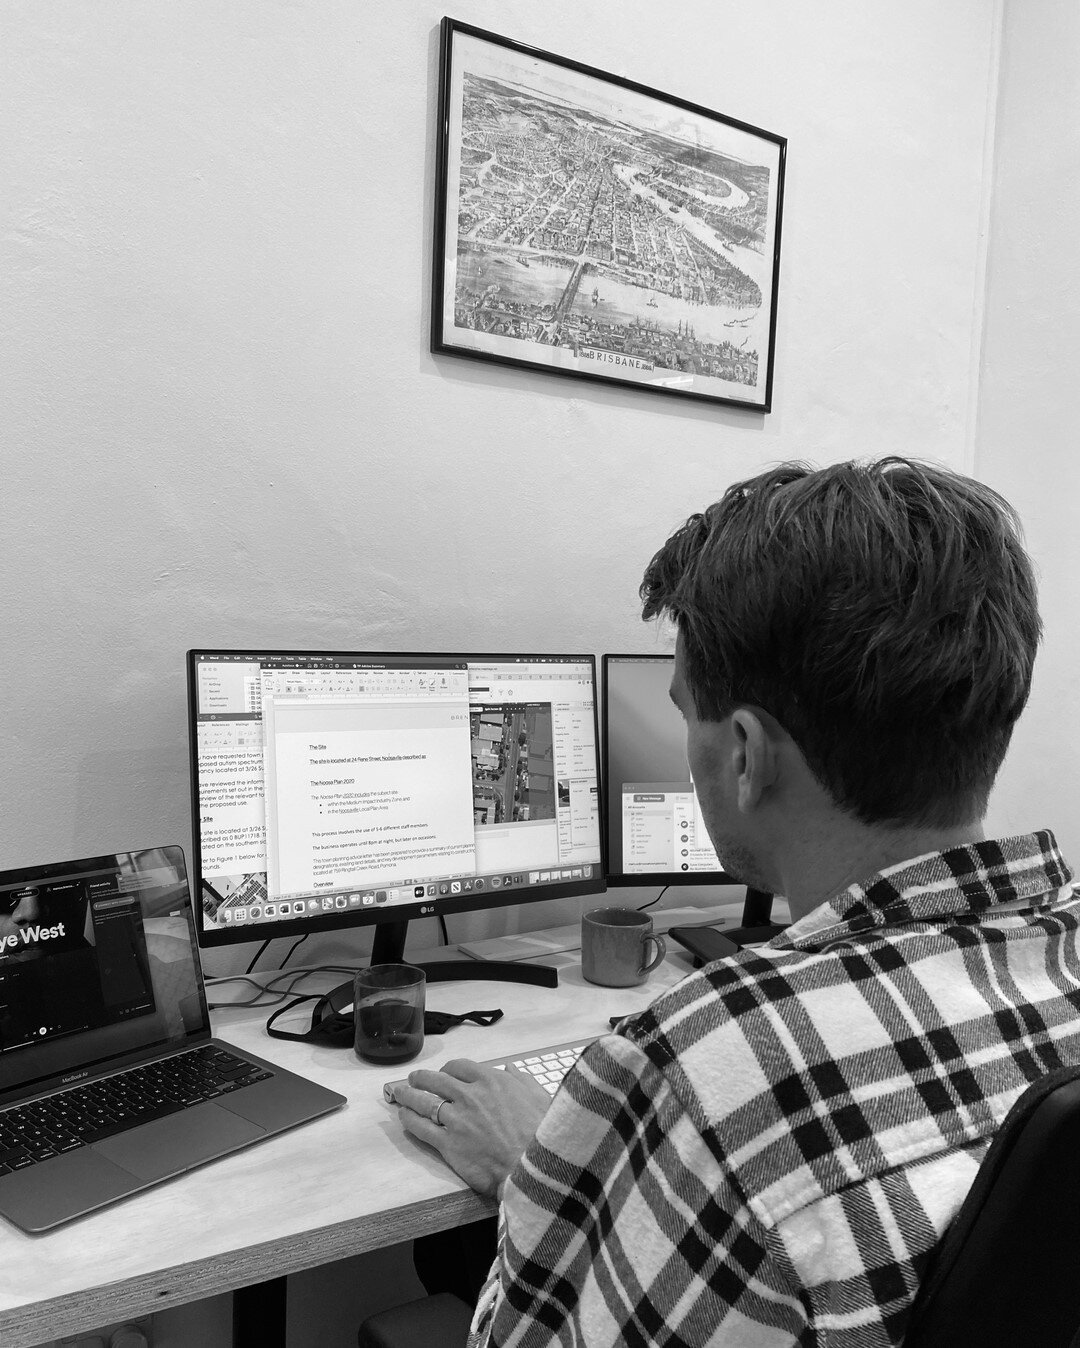 Working away on our current applications - a few interesting things in the works including: a carwash, rural cabins and eco-tourism, short term accomodation, new builds and additions, subdivisions and boundary realignments, local tourism and events, 